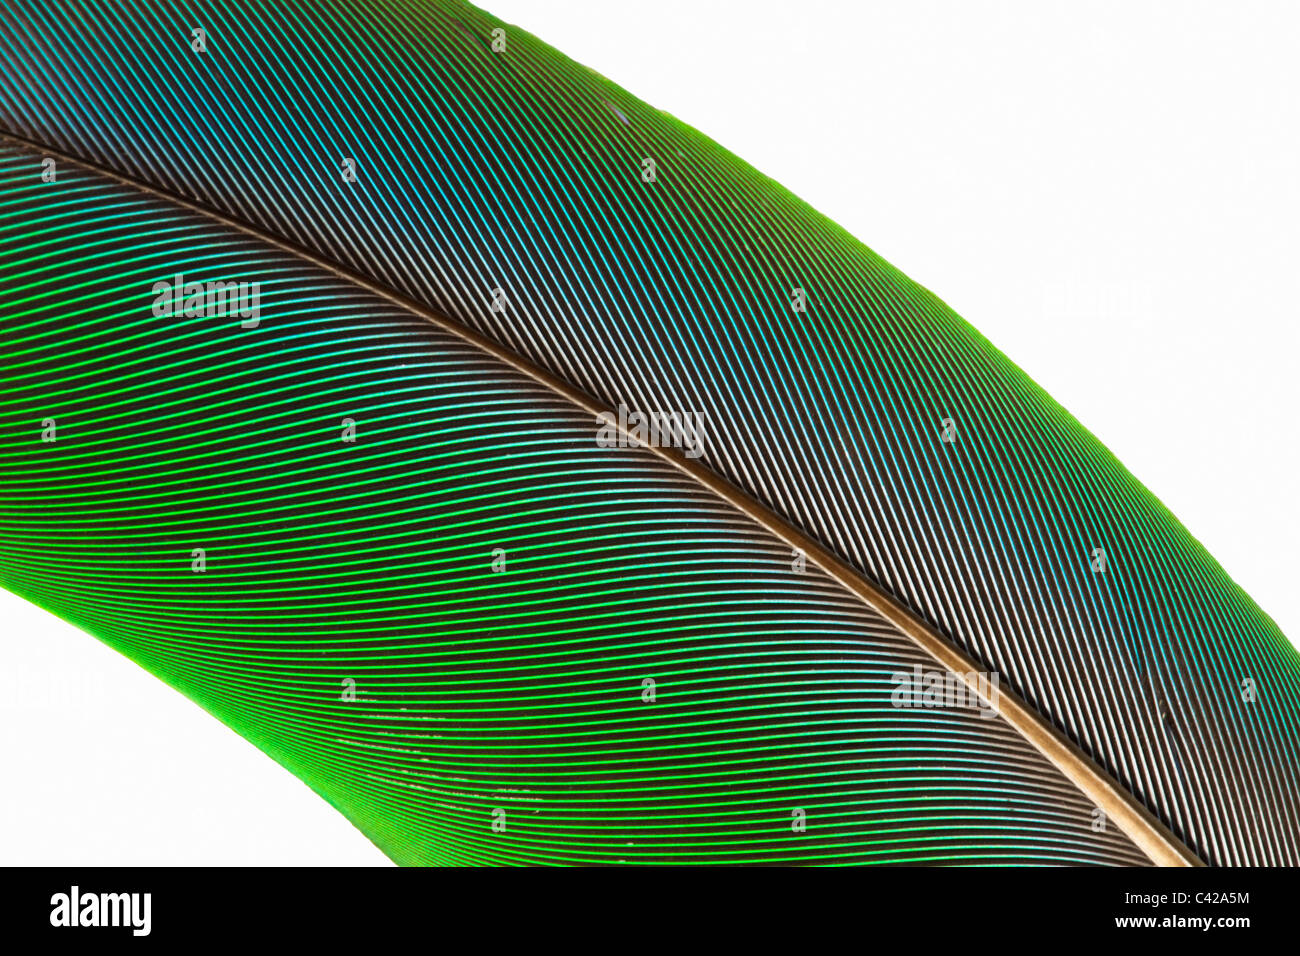 Green Feather Stock Photos and Pictures - 1,489,156 Images